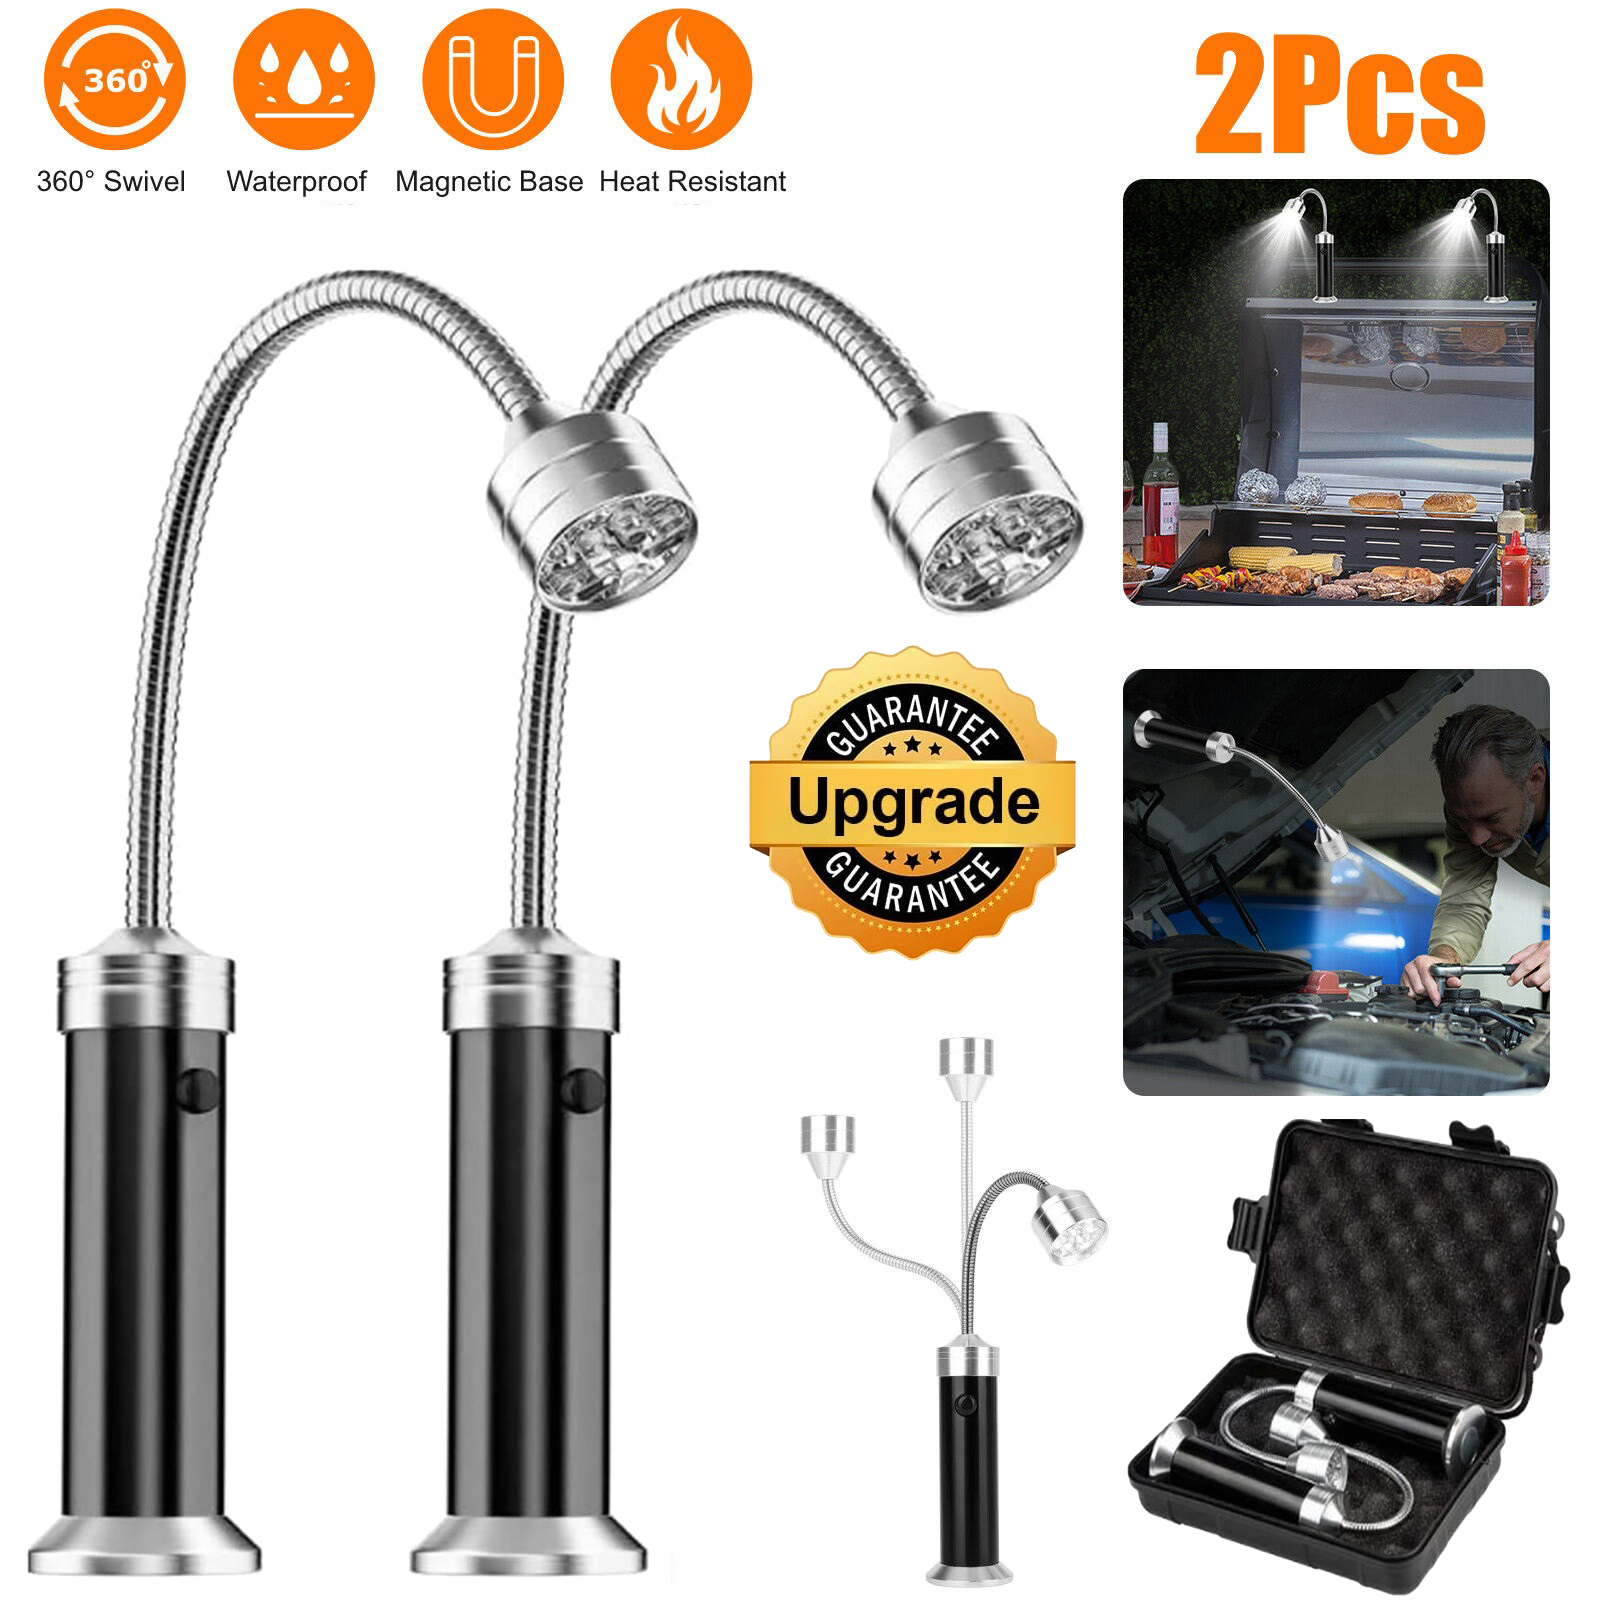 Upgared Barbecue Grill Light BBQ Grilling Accessories with 360º Flexible Long Gooseneck and Magnetic Base Grill Light Set Water & Heat Resistant-2pcs